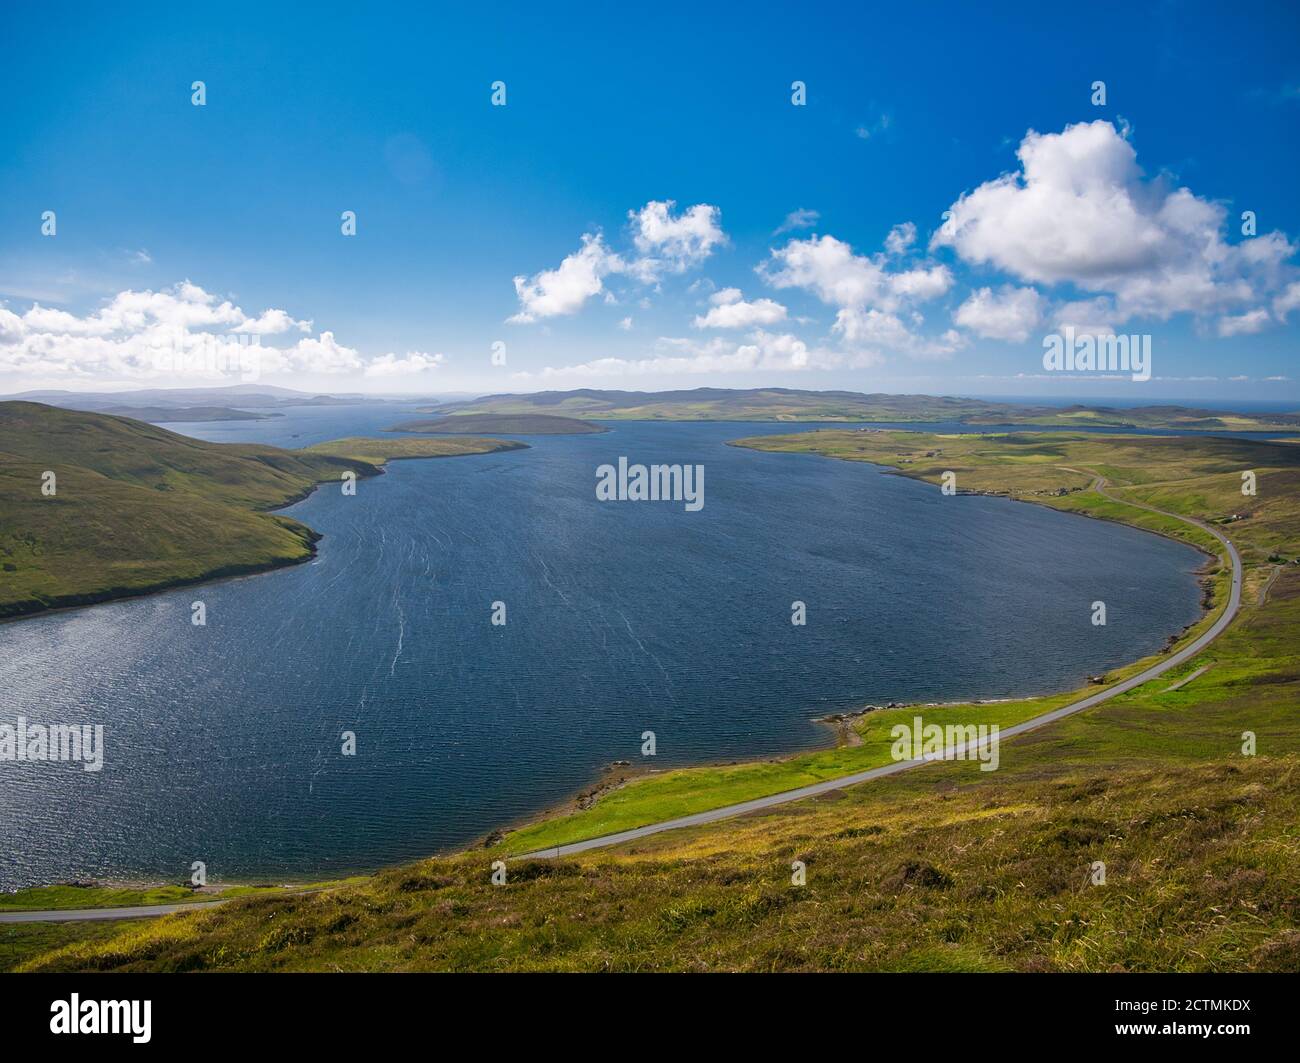 Taken on a sunny summer day, a view across the water of Olna Firth from the hillside of the Clubb of Mulla near Voe in Mainland, Shetland, UK. The isl Stock Photo